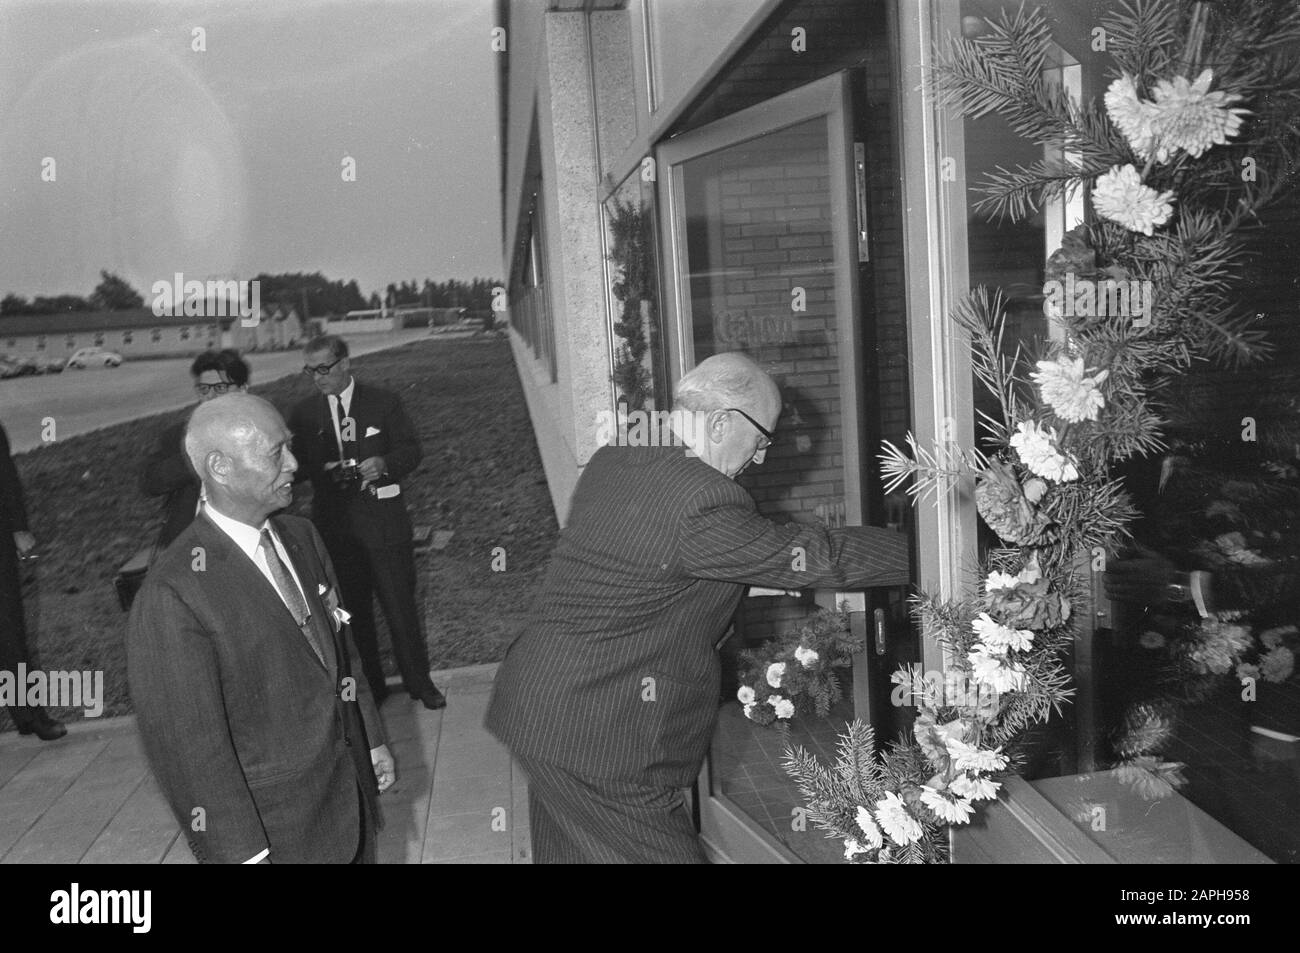 Opening of the Canon building by Mayor Samkalden Description: The mayor performs the opening act of the Canon building, accompanied by Mr. Mitarai (General Director) Date: 25 September 1968 Location: Amsterdam, Noord-Holland Keywords: mayors, directors, buildings, openings Personal name: Samkalden, Ivo Stock Photo